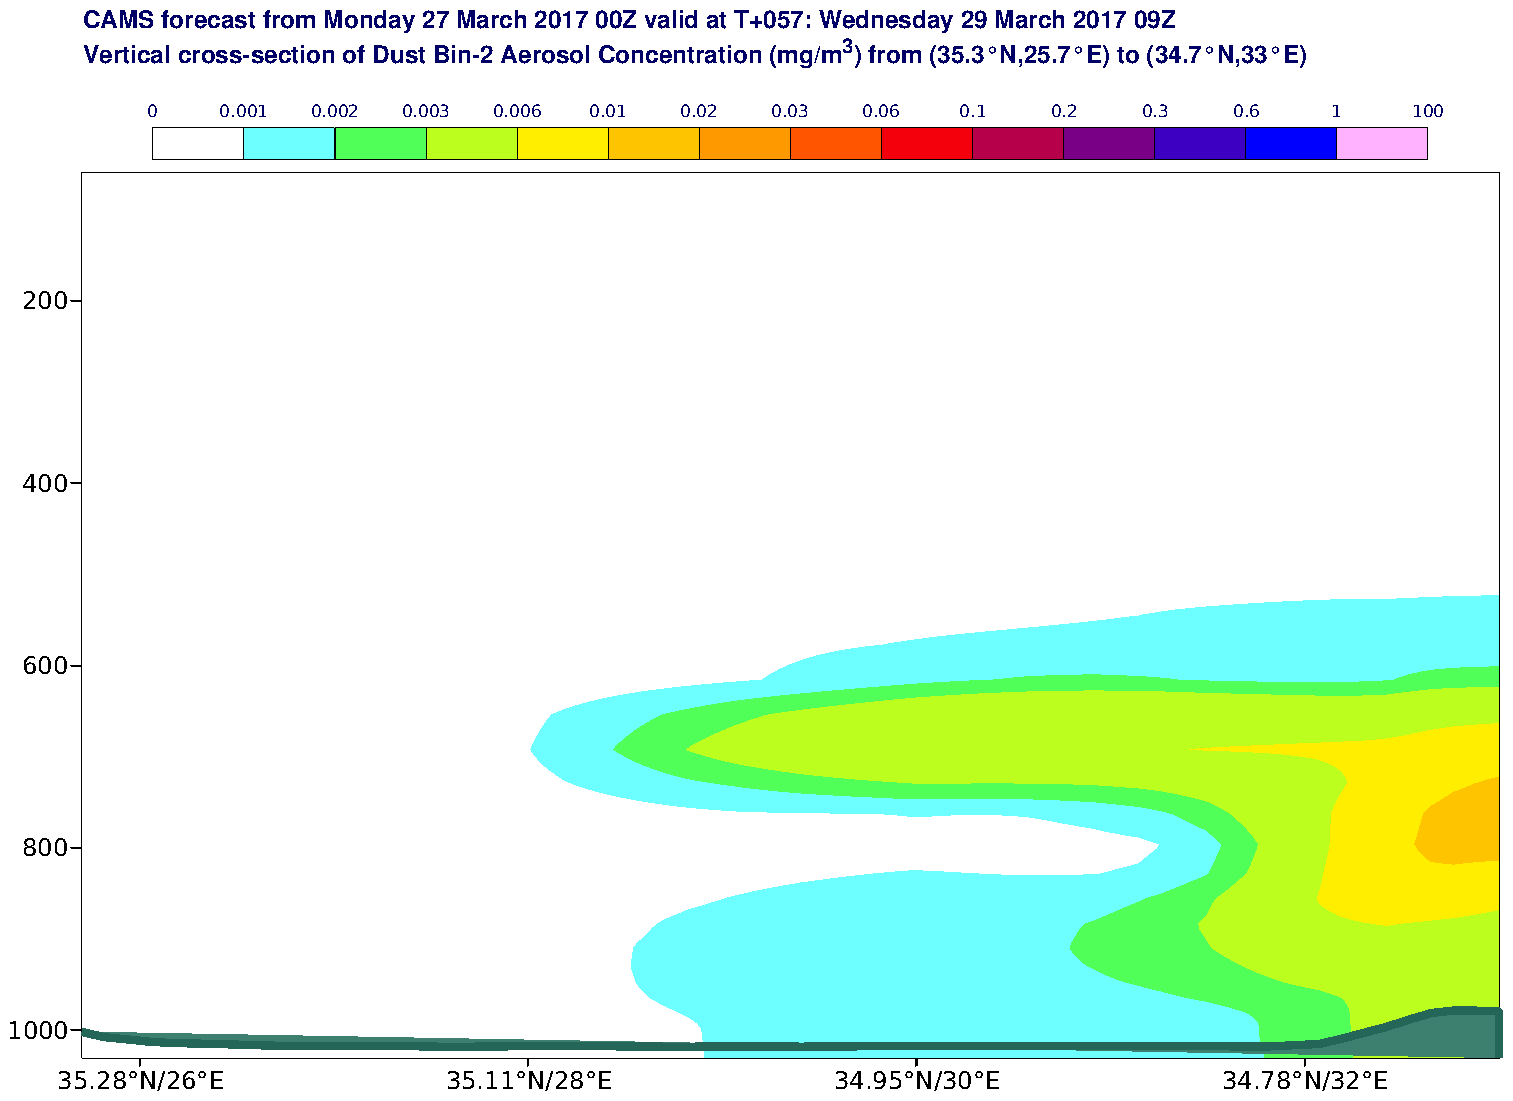 Vertical cross-section of Dust Bin-2 Aerosol Concentration (mg/m3) valid at T57 - 2017-03-29 09:00